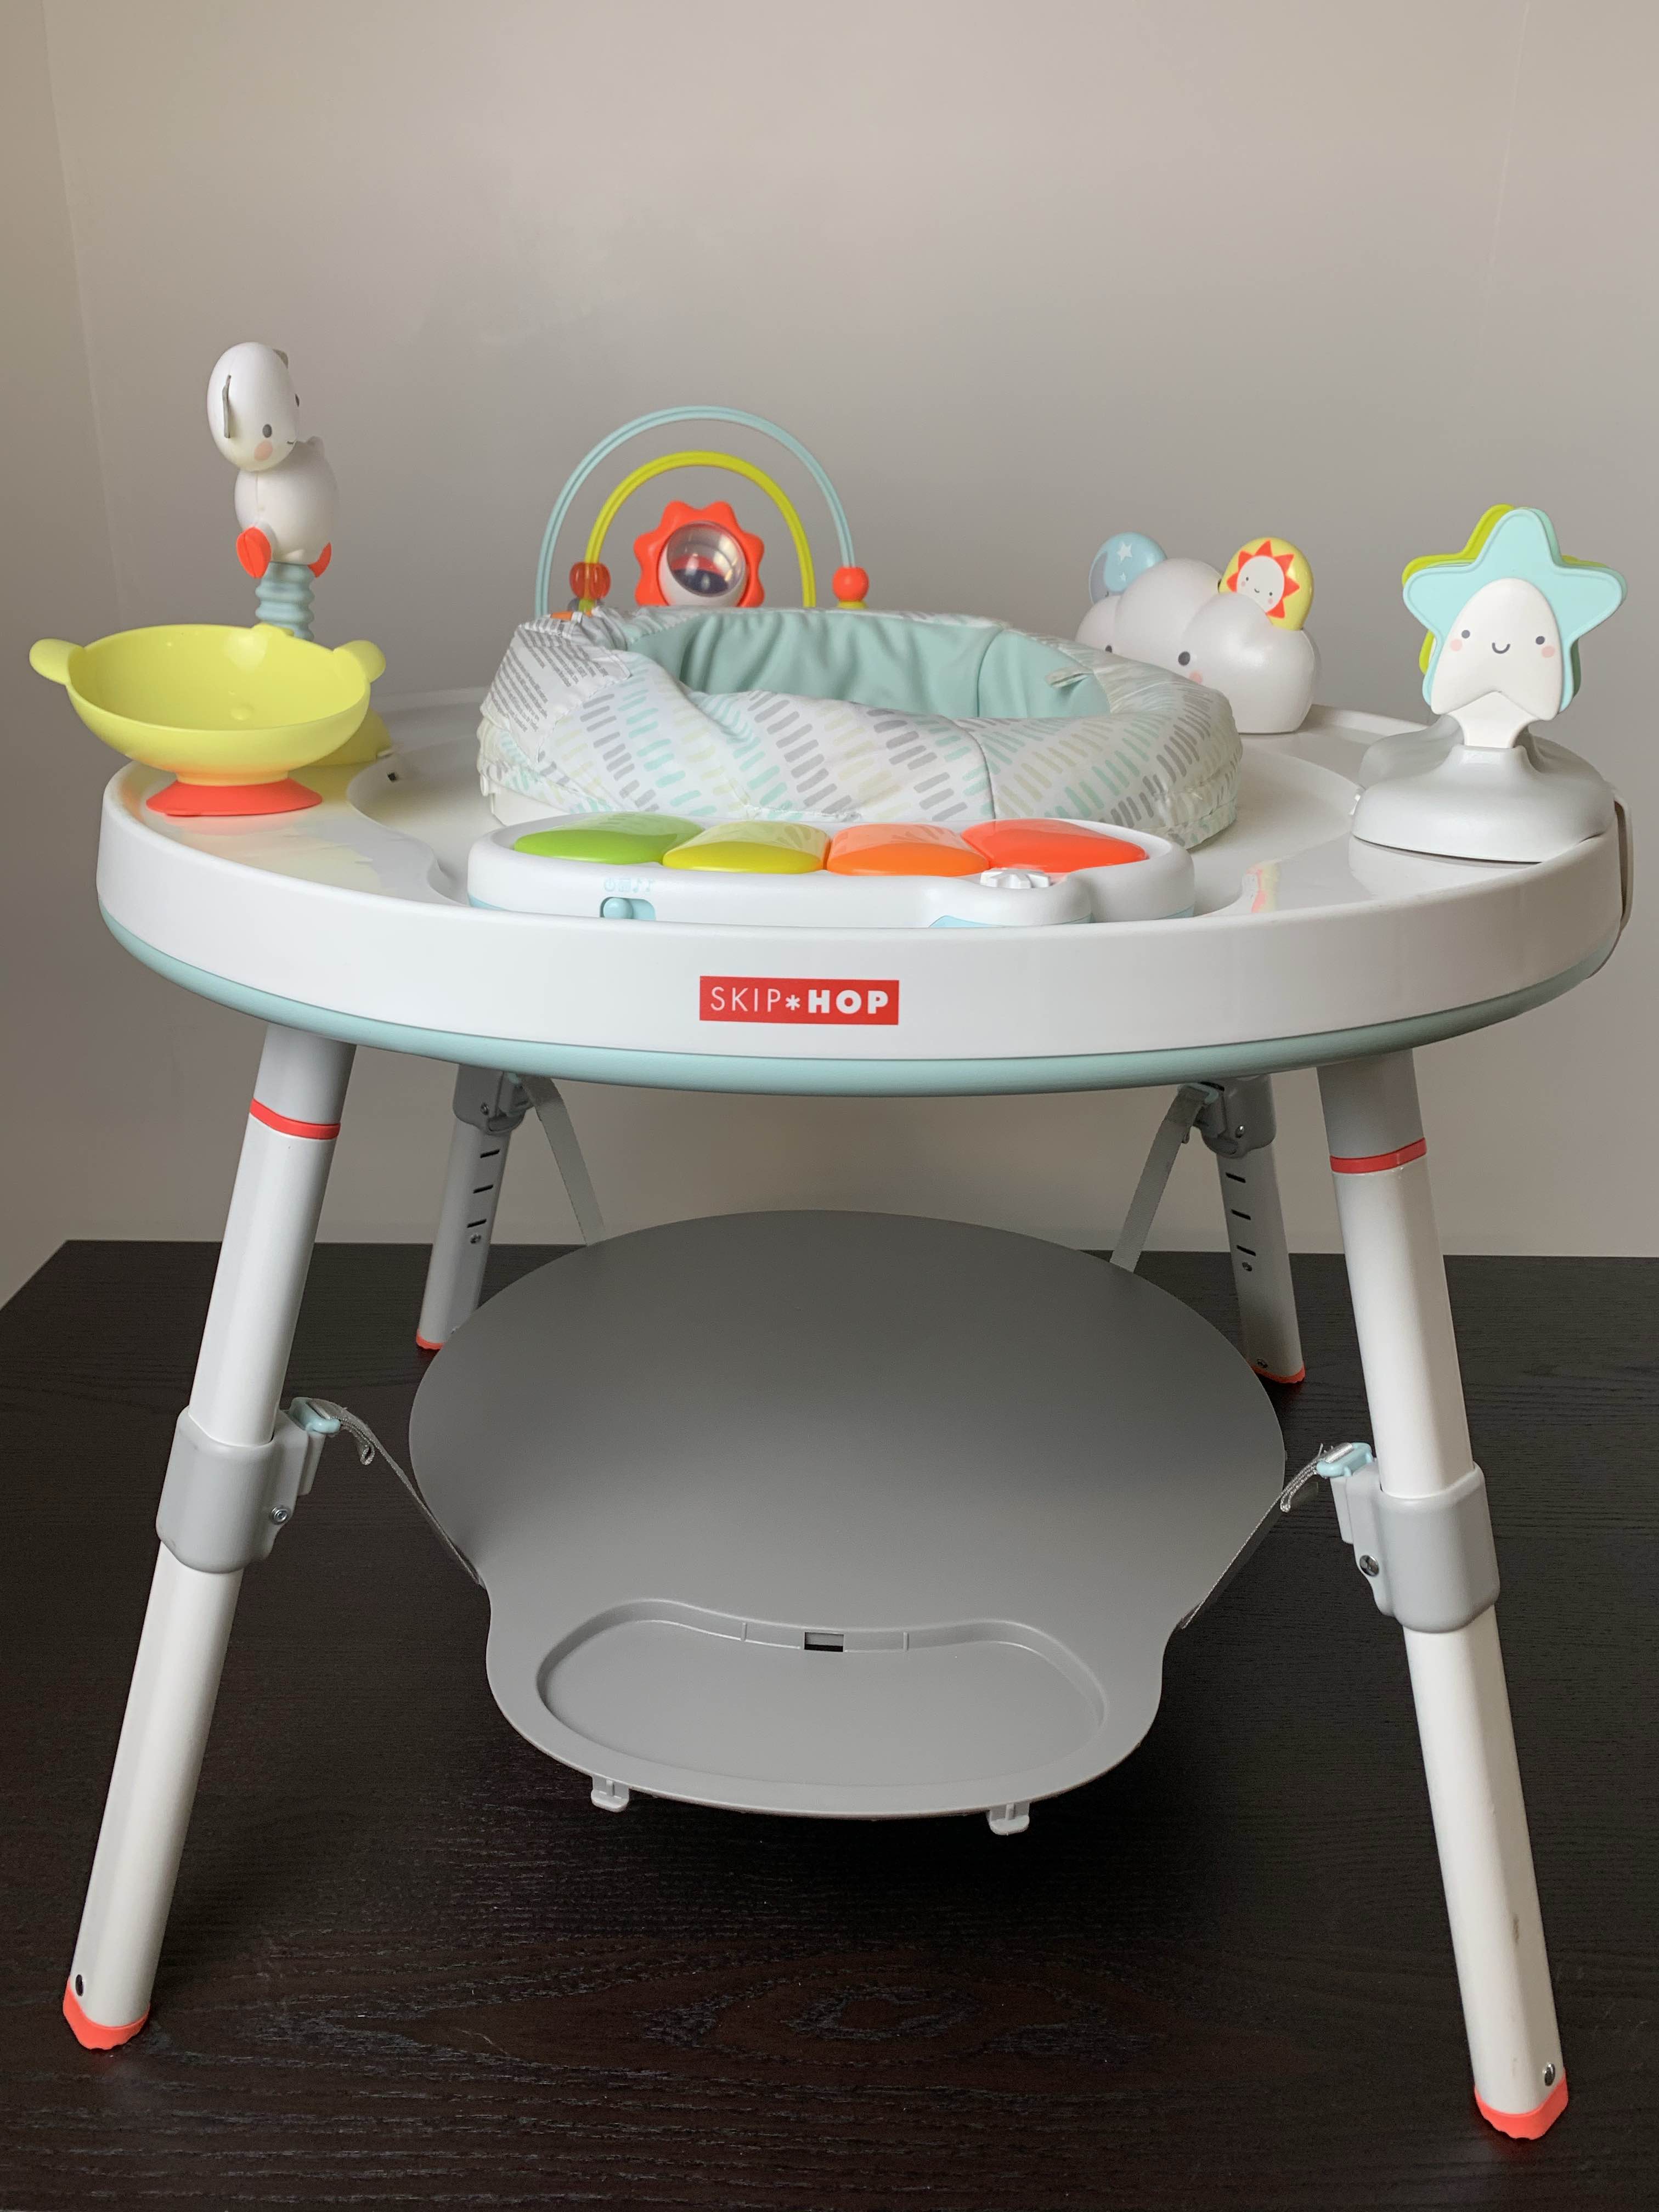 skip hop explore and more 3 stage activity center